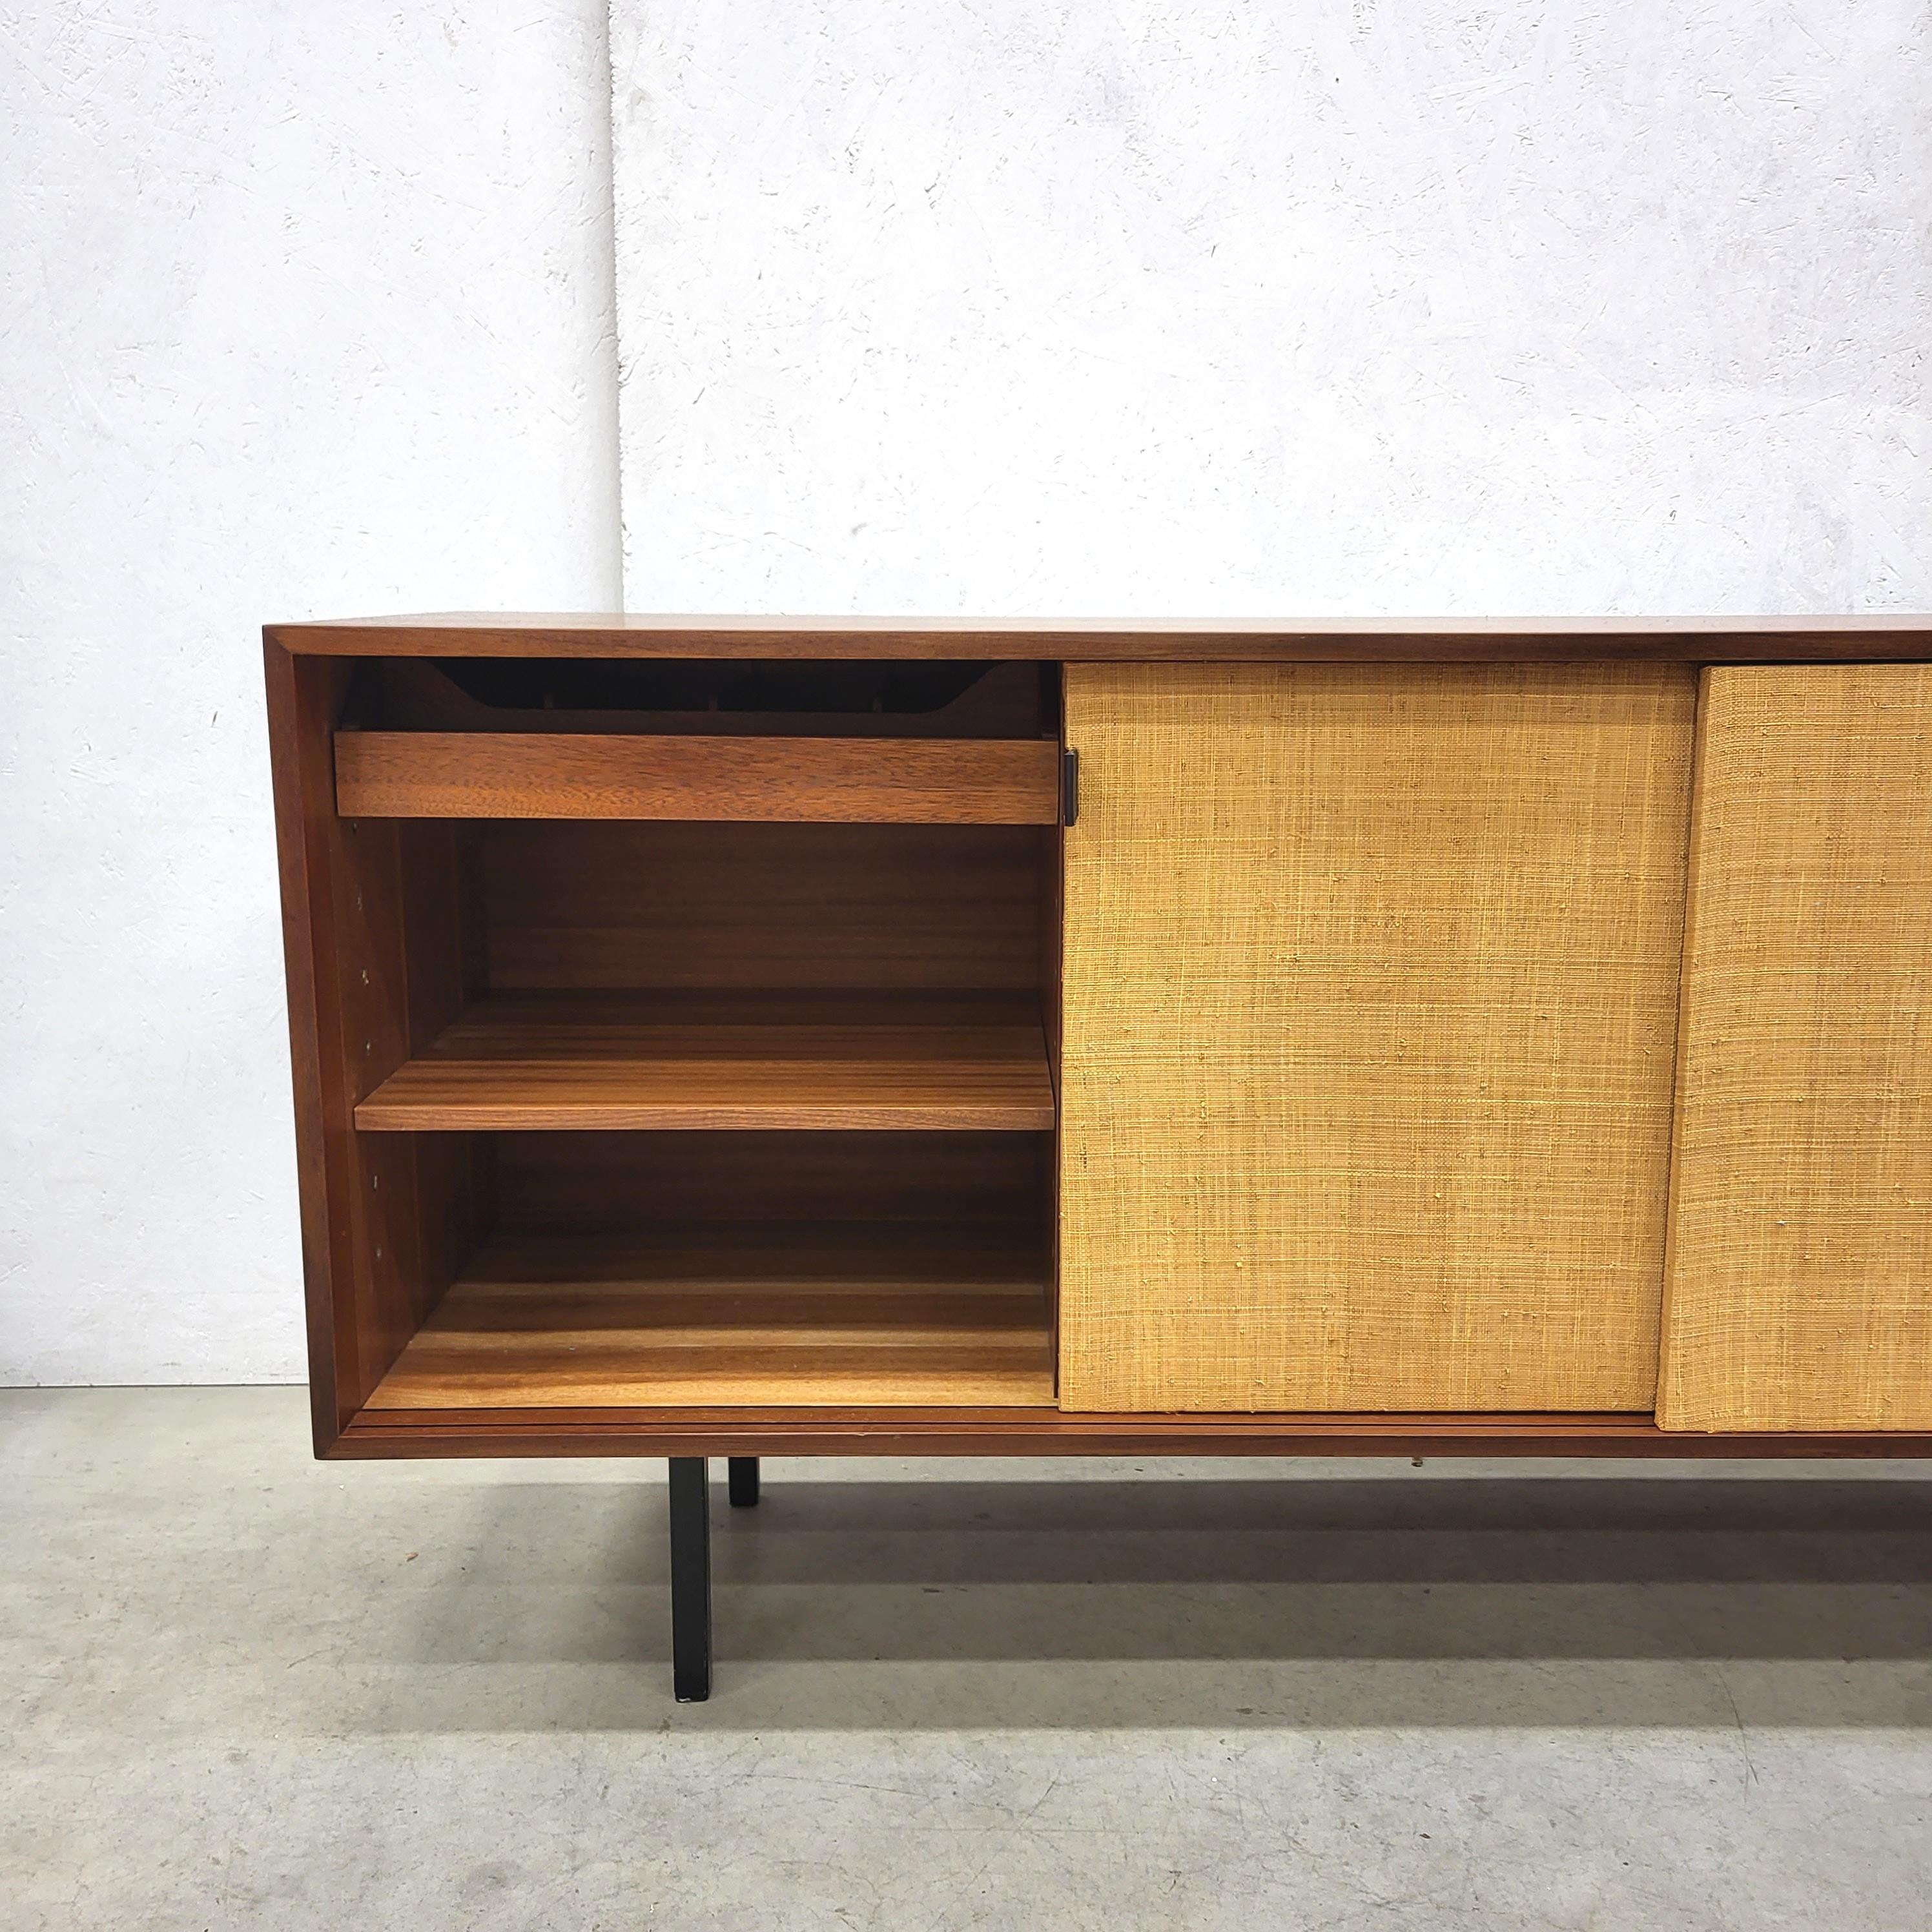 Rare midcentury Seagrass sideboard model 116 by Florence Knoll for Knoll.
Designed in 1947 and made in Germany in a very low production line in the early 1950s.

Impressive veneer & wood structure. Stunning masterpiece!
Reduced design made with